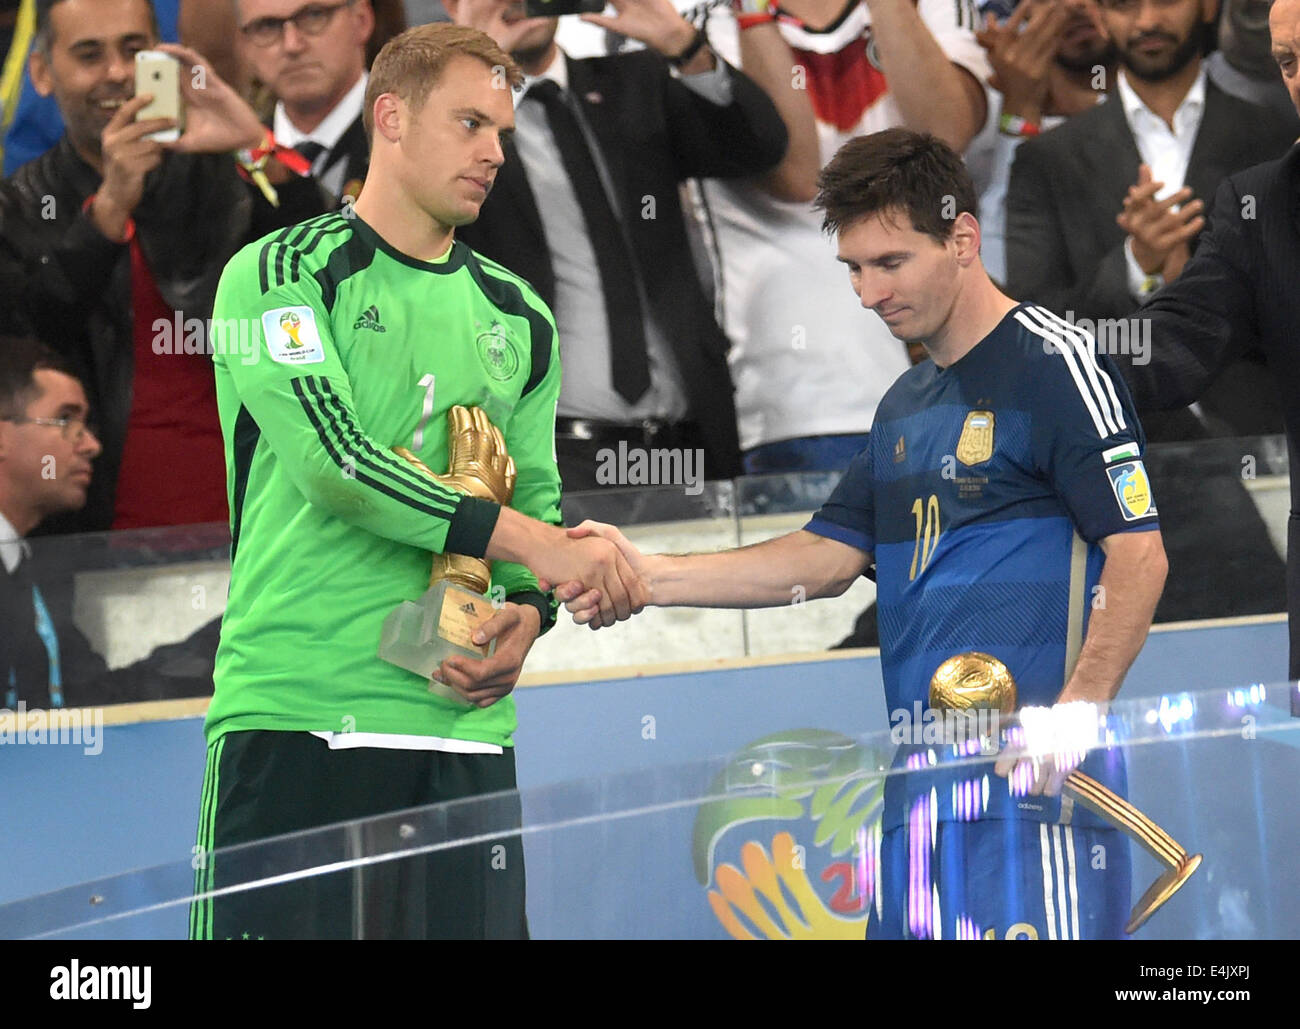 Rio de Janeiro, Brazil. 13th July, 2014. Goalkeeper Manuel Neuer of Germany (L) and Lionel Messi of Argentina shakes hand after being awarded as best goalkeeper with the golden glove and the best player with the golden ball after the FIFA World Cup 2014 final between Germany and Argentina at the Estadio do Maracana in Rio de Janeiro, Brazil, 13 July 2014. Photo: Andreas Gebert/dpa/Alamy Live News Stock Photo